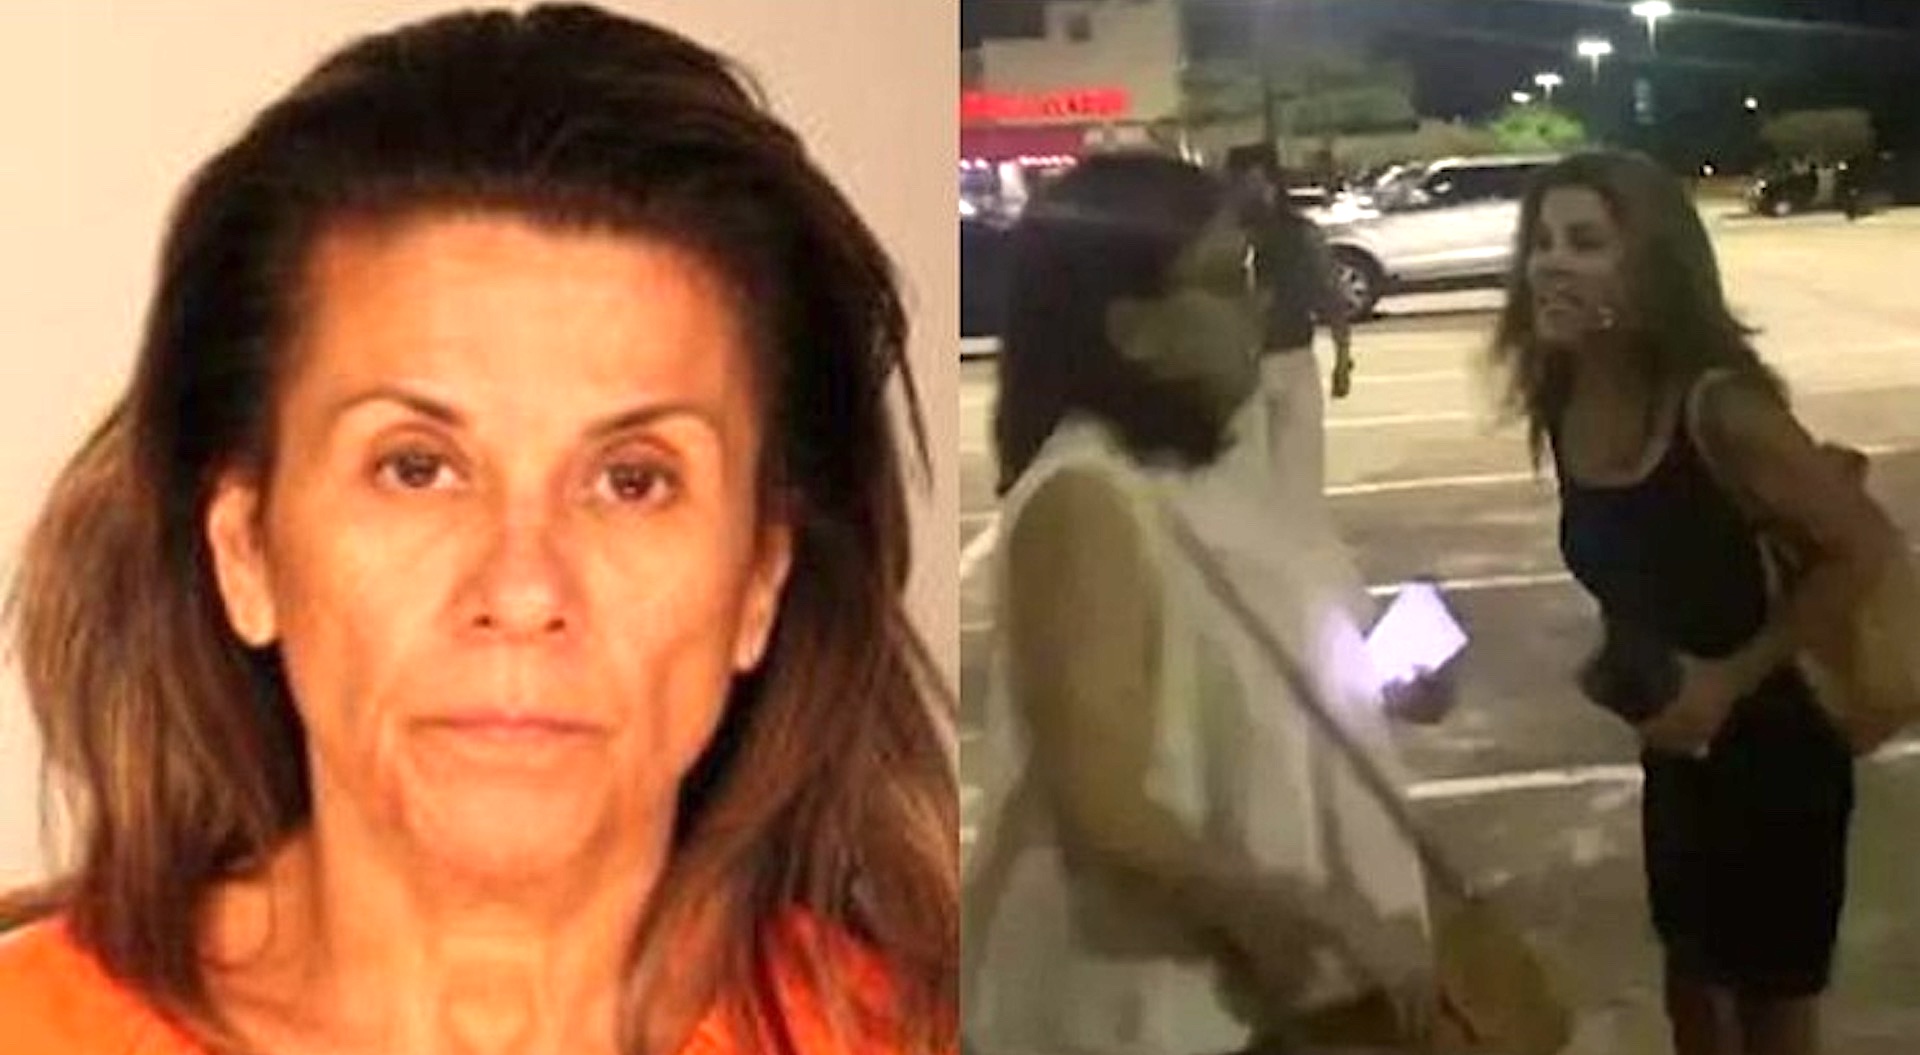 Texas woman arrested for hate crime against Indians following viral video